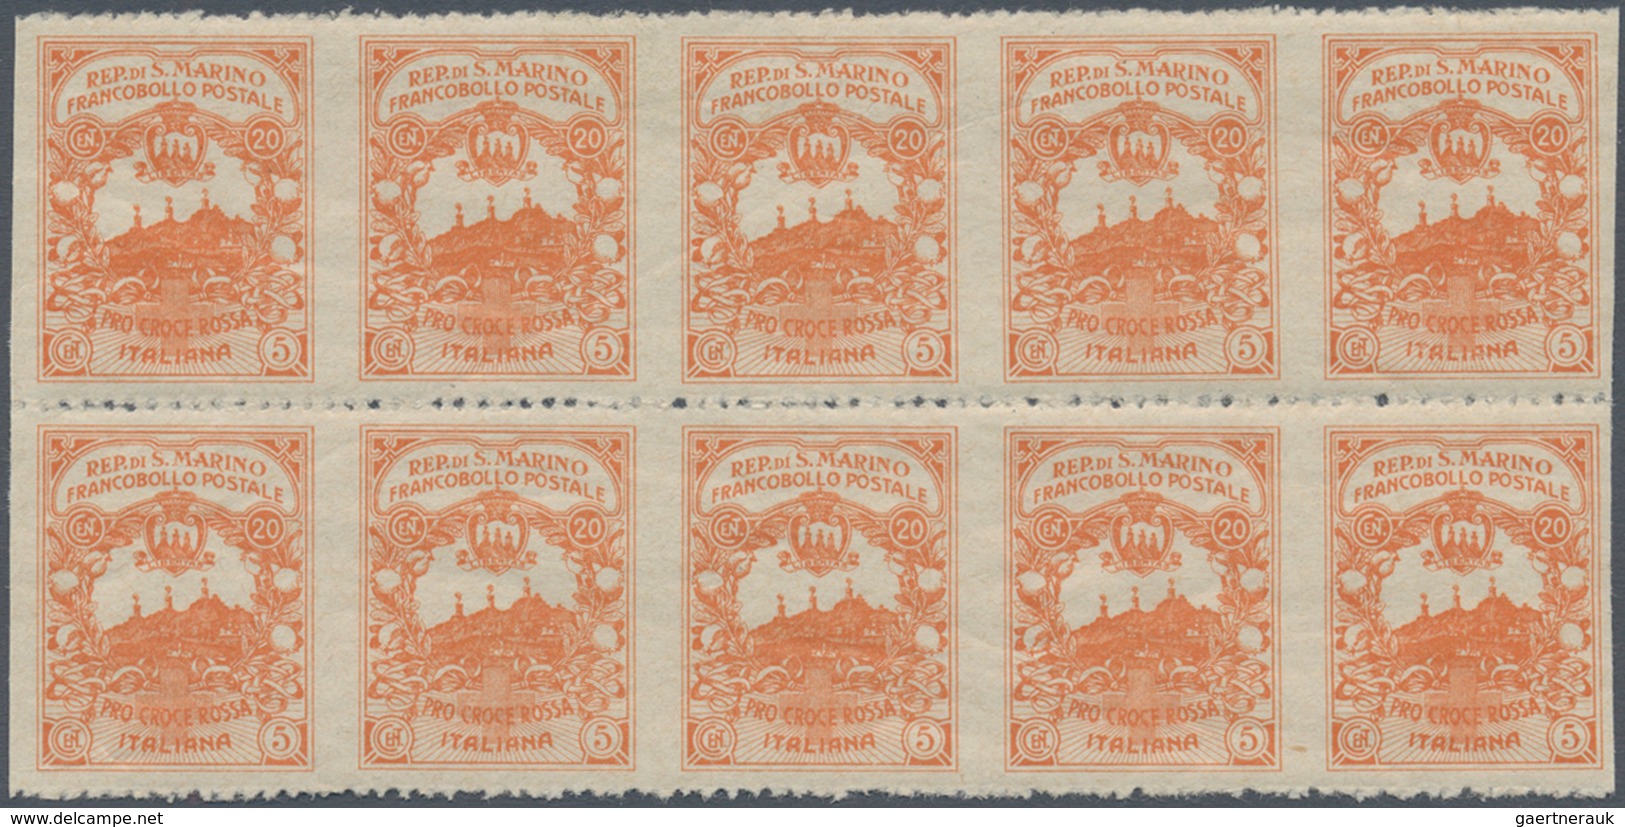 00662 Thematik: Rotes Kreuz / Red Cross: 1916, San Marino. NON-ISSUED Stamp 20+5c, Orange, PRO CROCE ROSSO - Rode Kruis